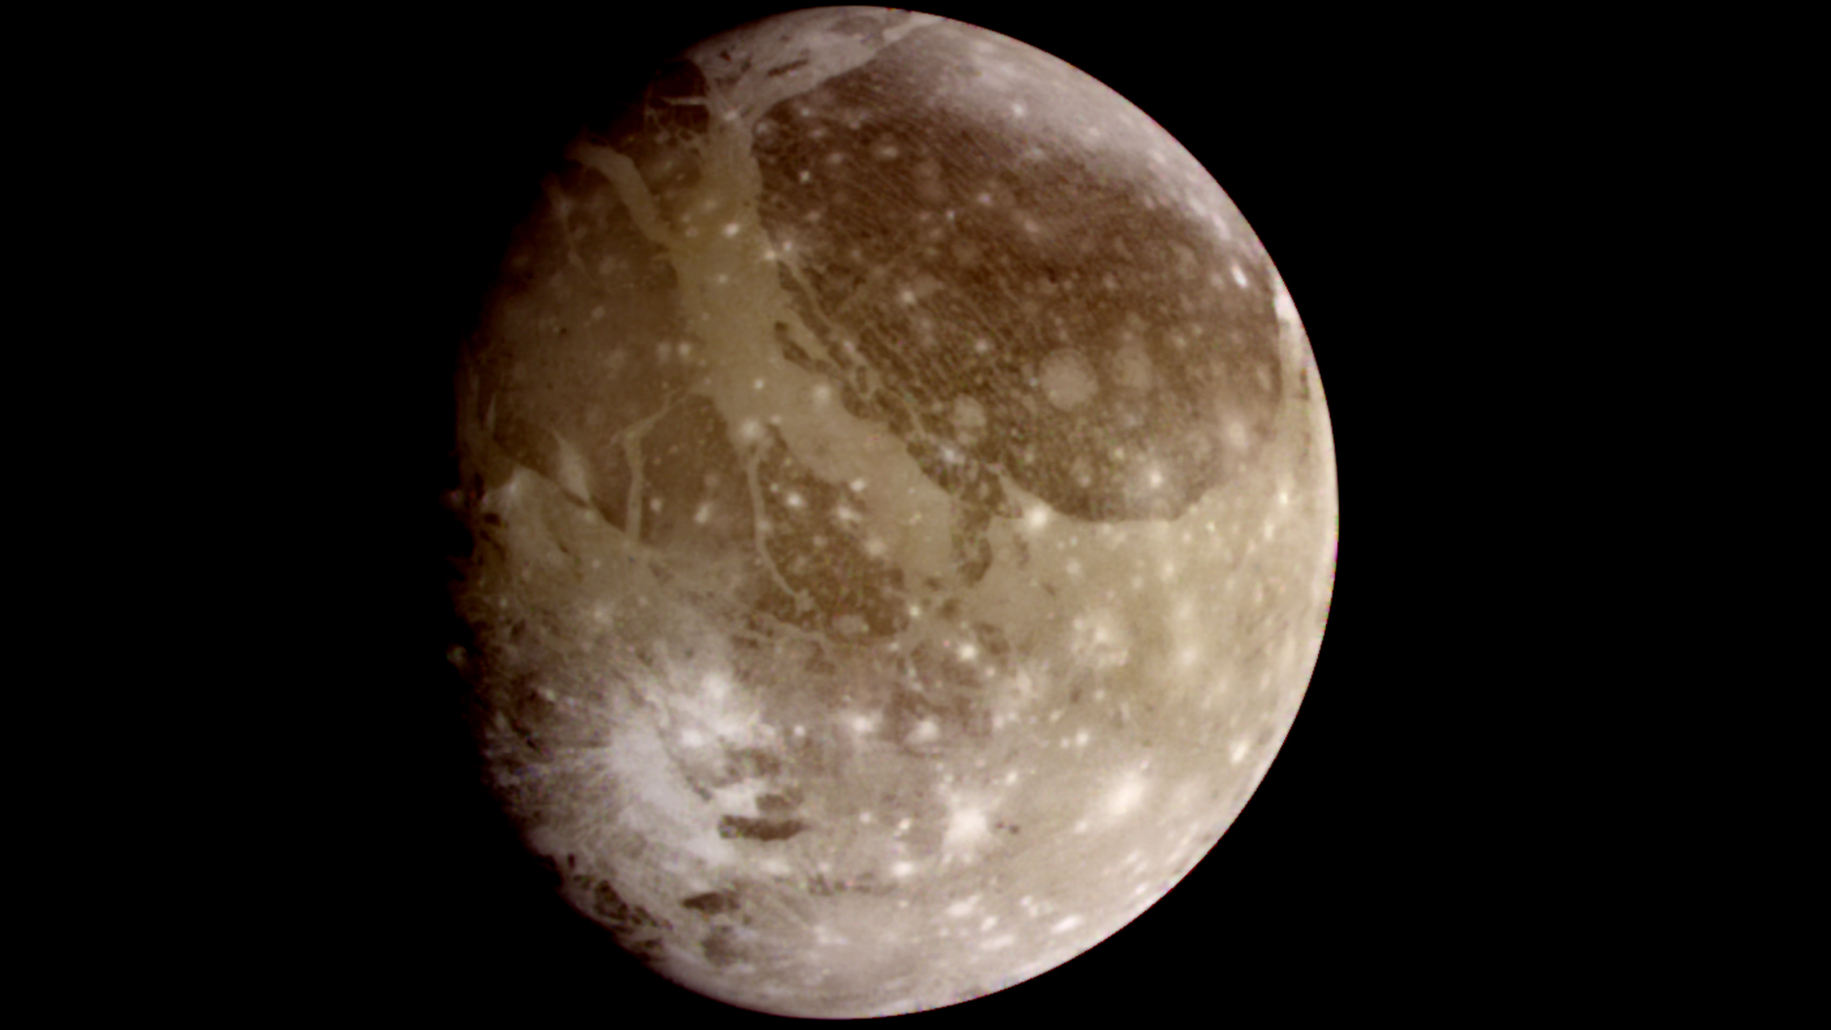 Ganymede turns out to be different from Europa